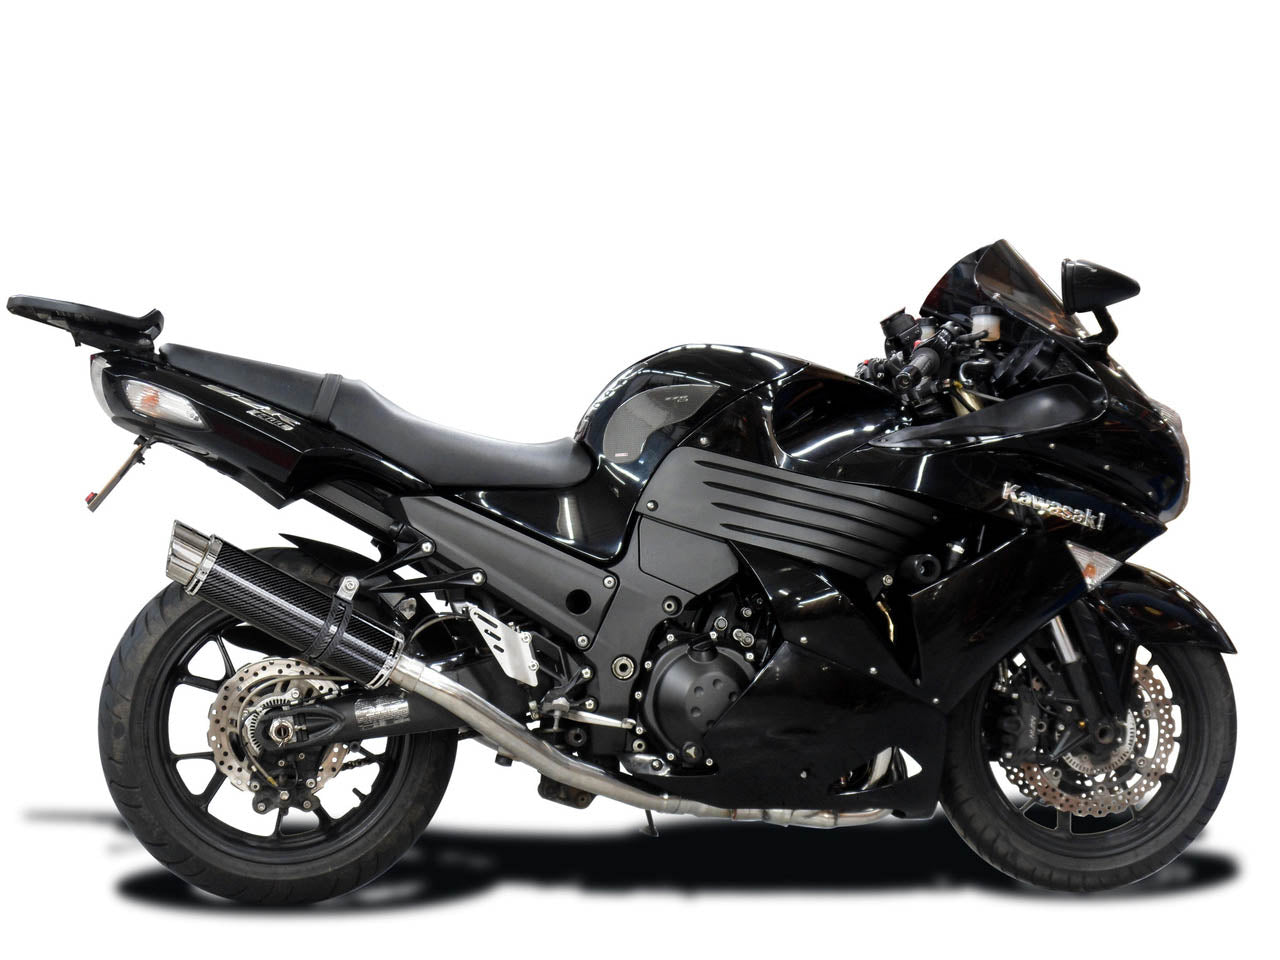 DELKEVIC Kawasaki Ninja ZX-14 (08/11) Full Exhaust System with DL10 14" Carbon Silencers